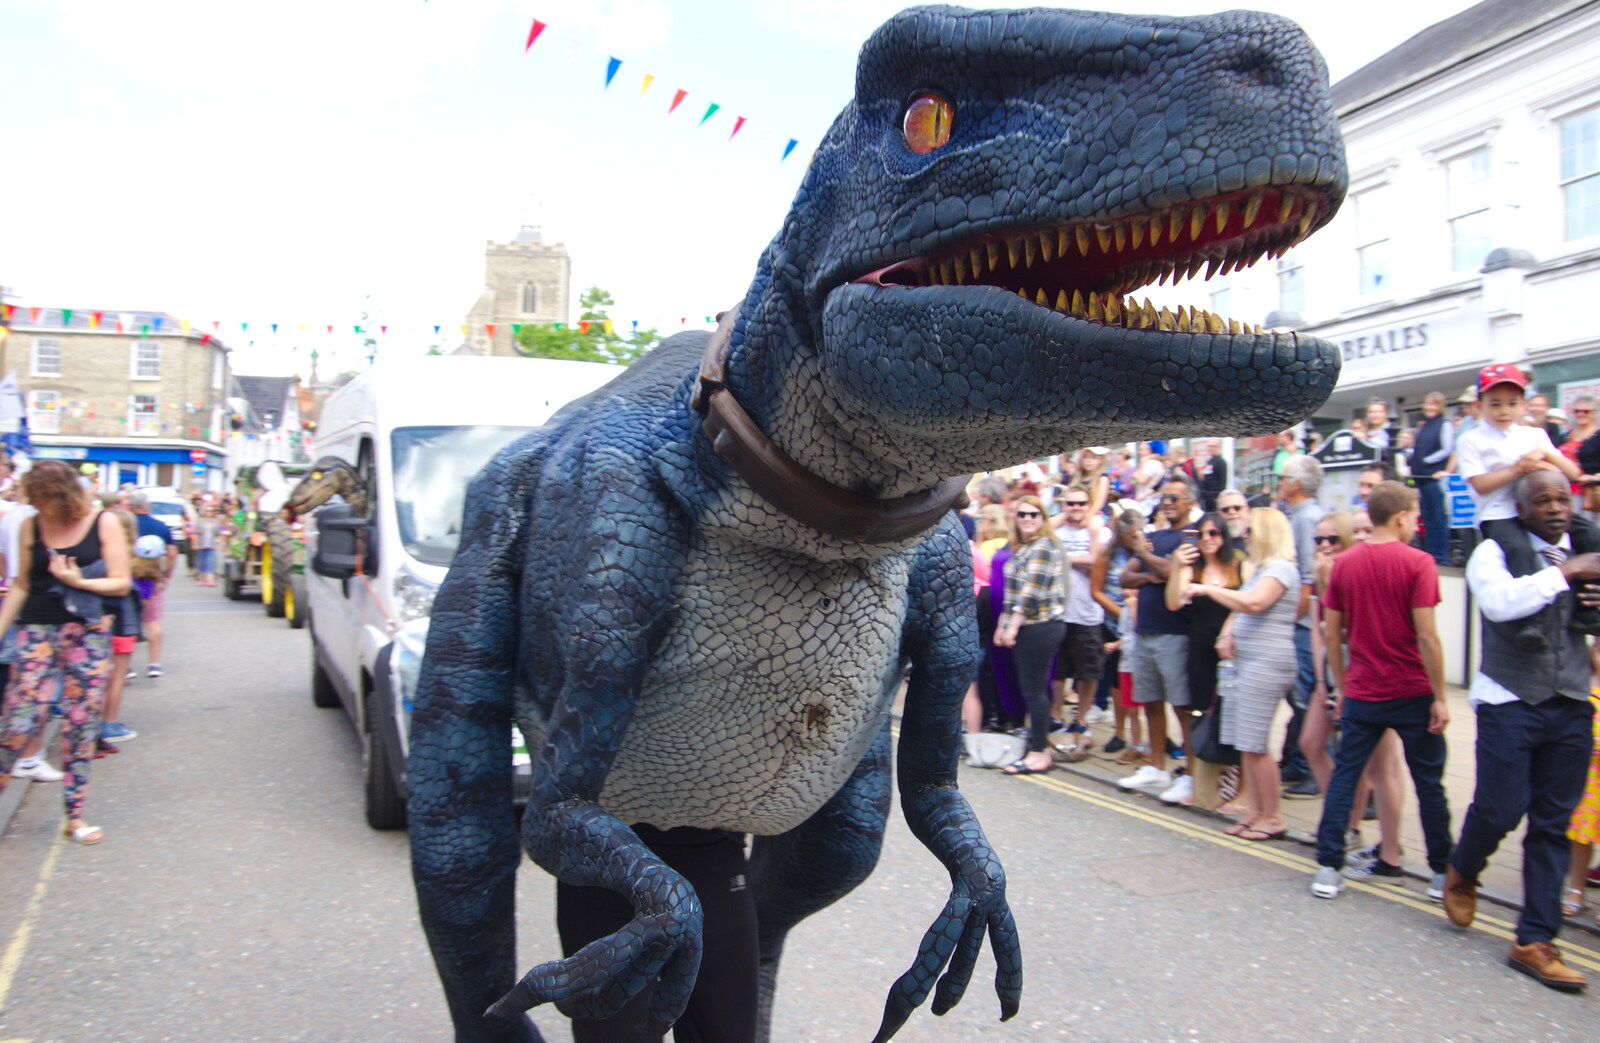 Blue dinosaur on Mere Street from The Diss Carnival 2019, Diss, Norfolk - 9th June 2019